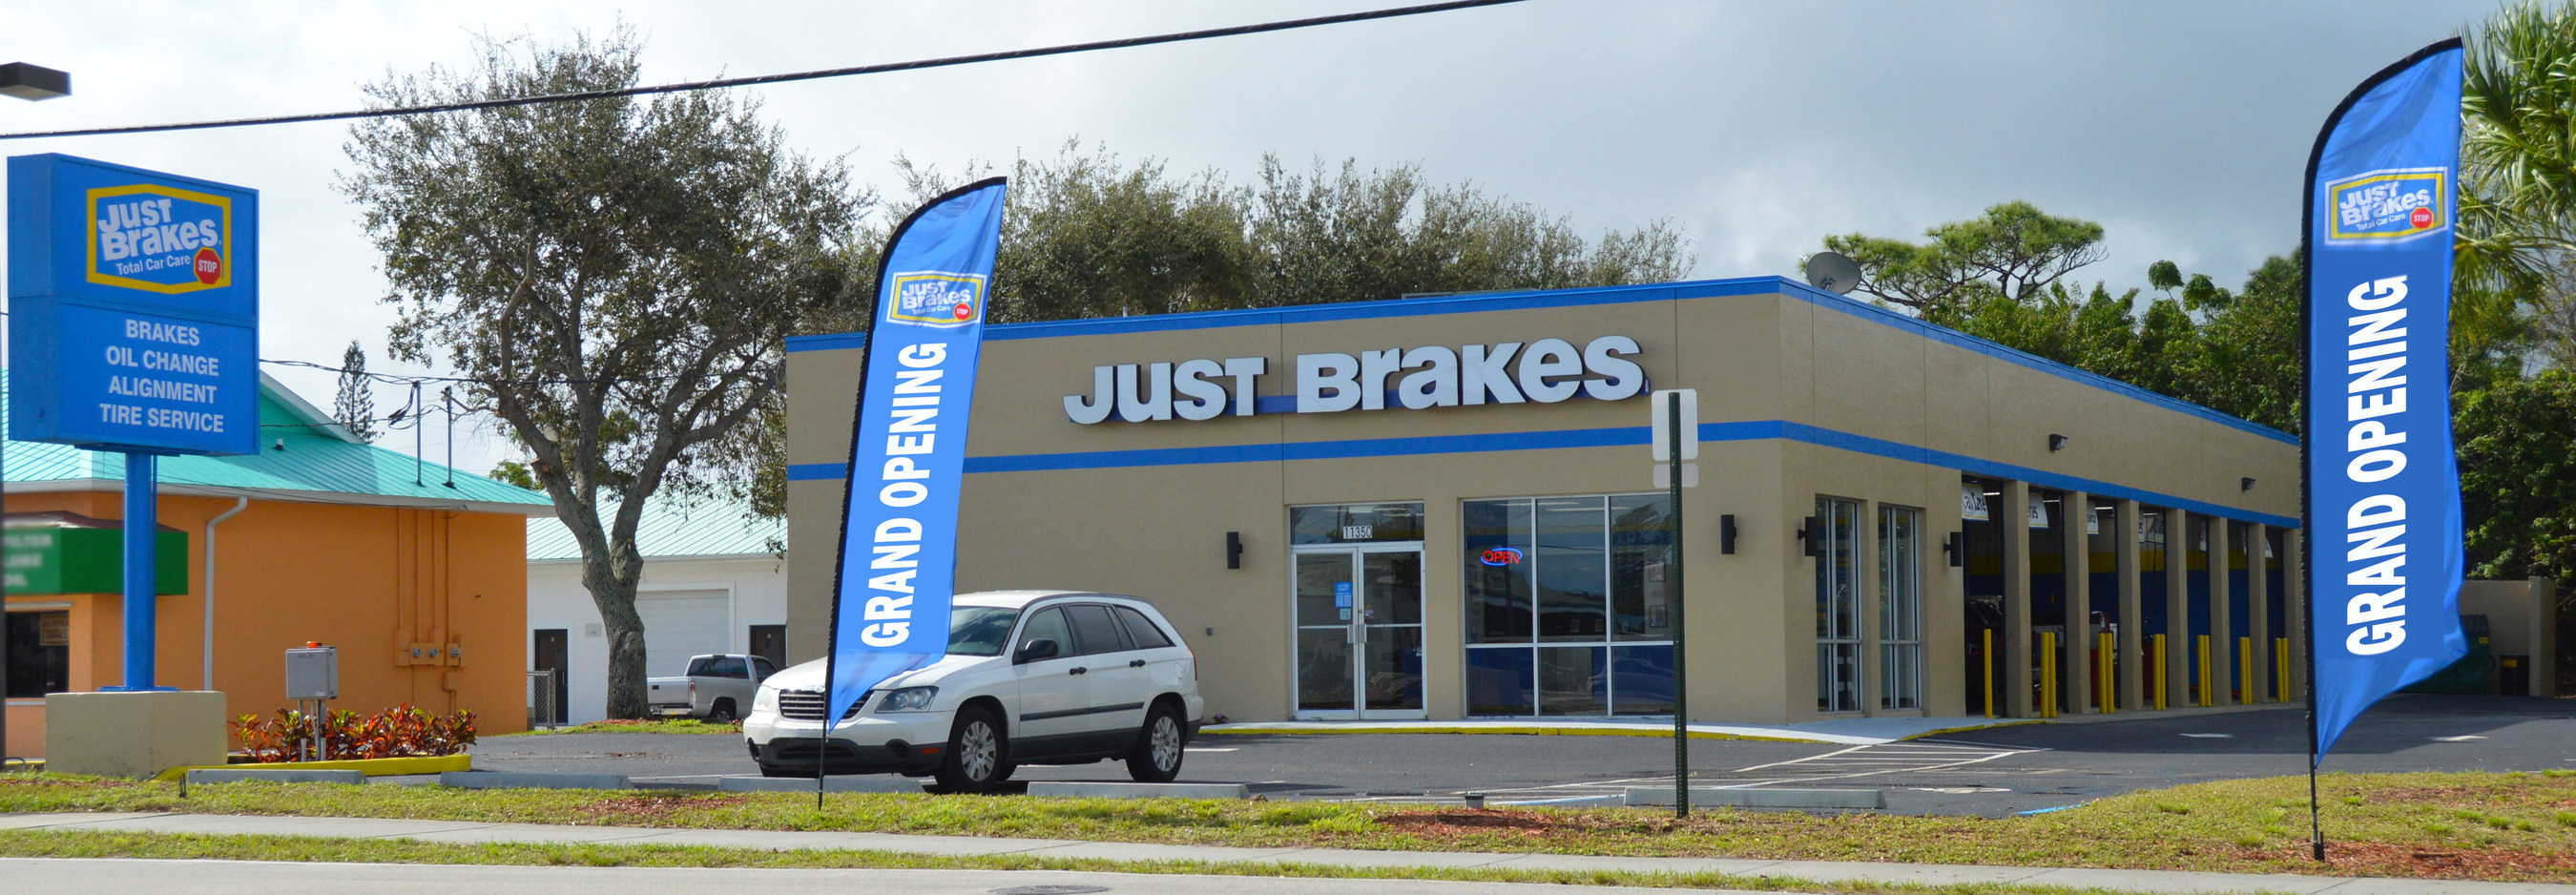 Just Brakes announces grand opening at 11350 Southeast Federal Highway in Hobe Sound, Florida. The new location is part of multi-stage plan to expand Just Brakes in existing and new markets, coming 1 year after Just Brakes was acquired by a group including Hicks Equity Partners, Gemini Investors, Monhegan Partners and Just Brakes CEO Bill Ihnken. In addition to brake system diagnosis and repair services, the Hobe Sound location is also a full service tire and maintenance services facility. Just Brakes aims to provide its customers with the quality and value they've come to expect from the Just Brakes brand.